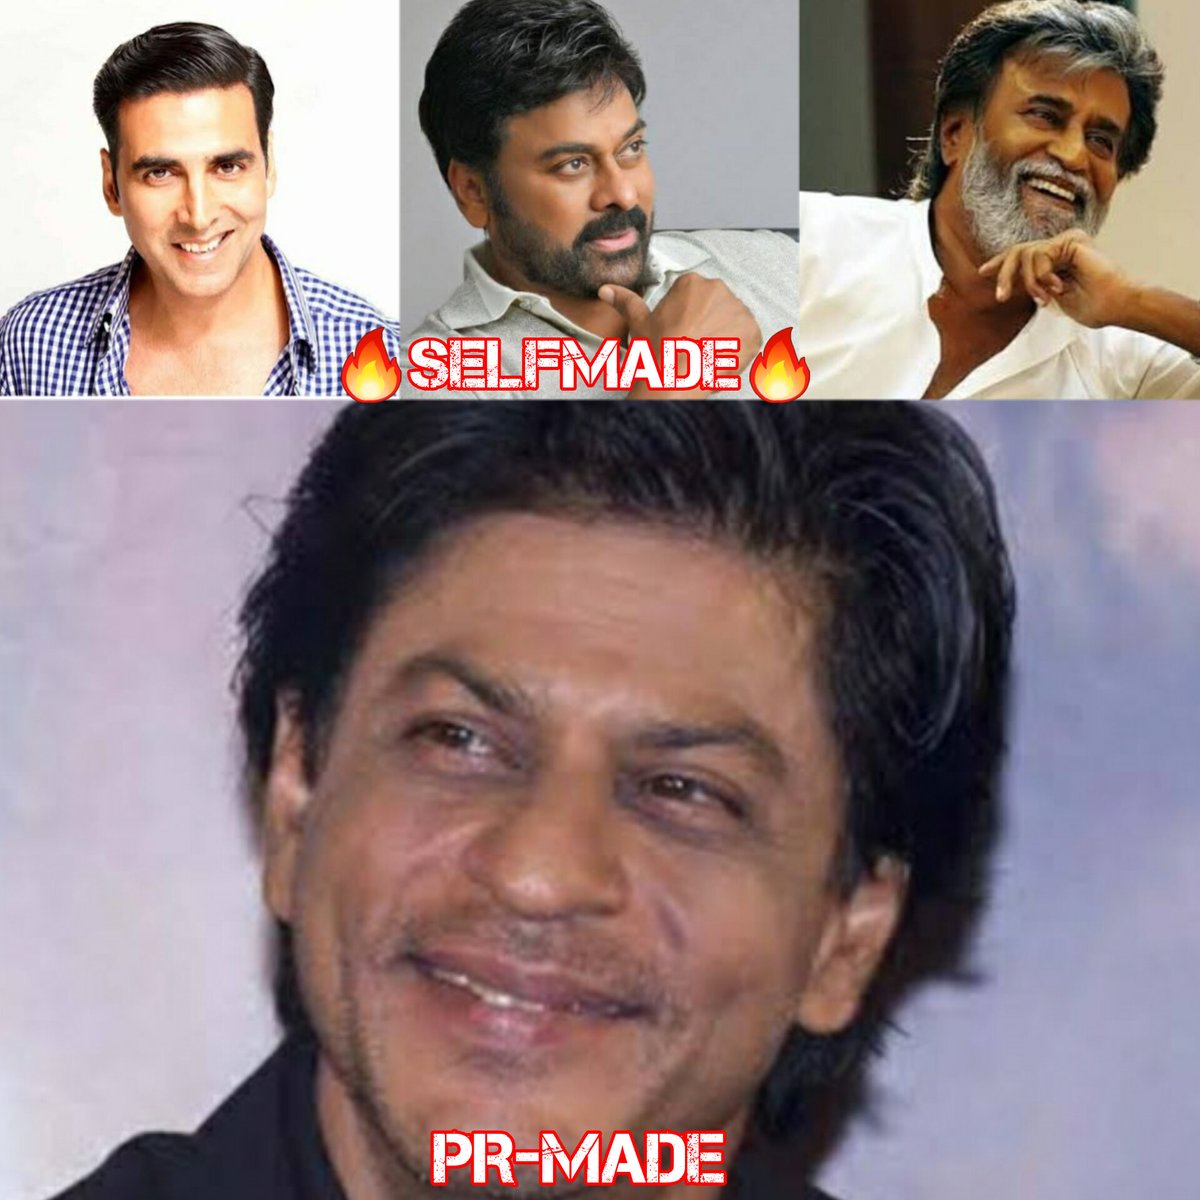 A real self made superstars who built their career with hard work, dedication and belief in themselves👑🔥

#AkshayKumar #Chiranjeevi #rajnikanth